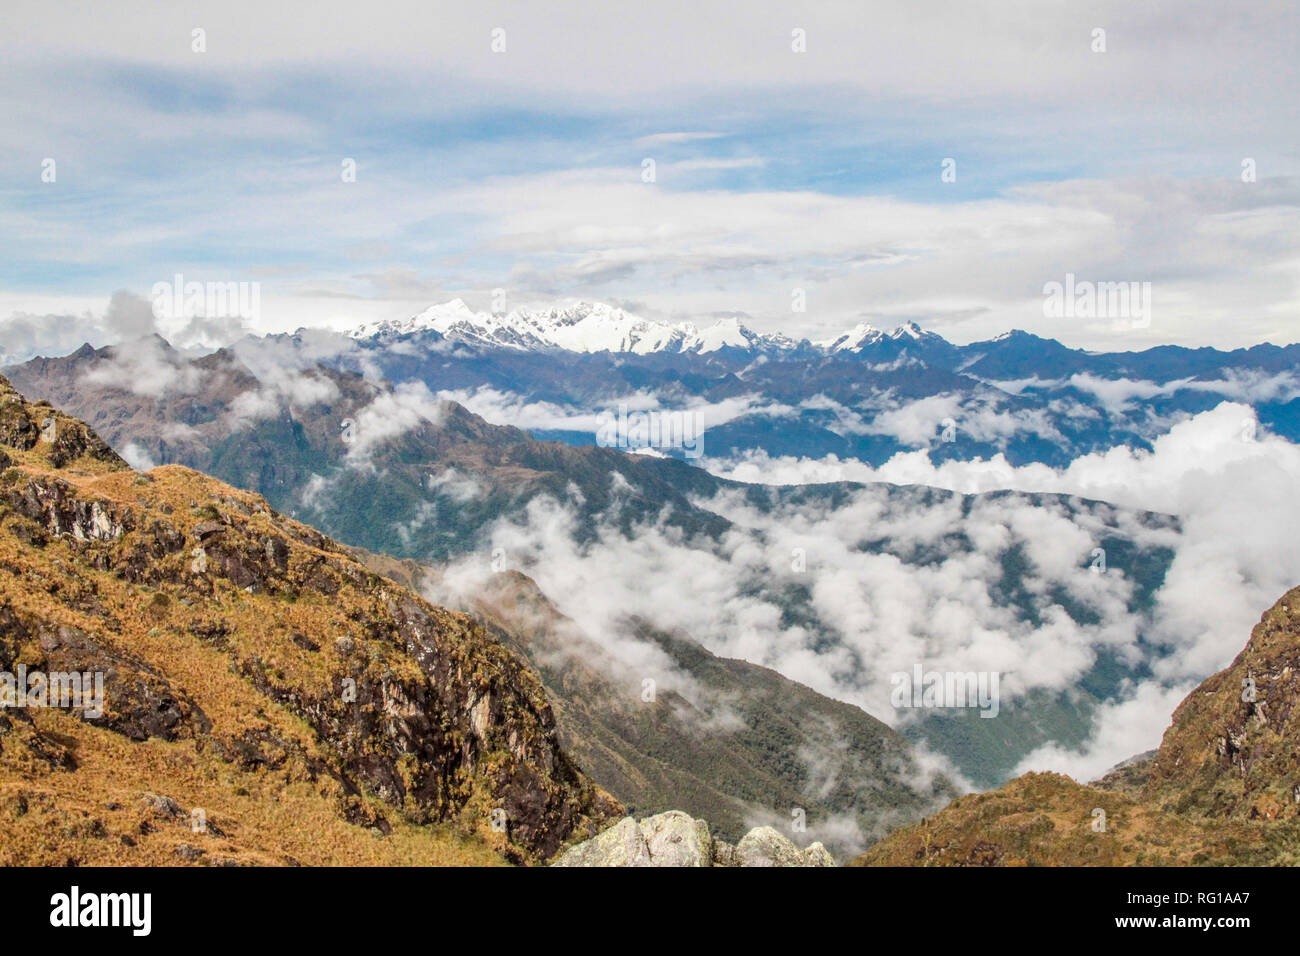 Breathtaking view of the andean landscape following the world famous hiking trail Inca Trail in Peru, through a mysterious landscape of cloud forest Stock Photo